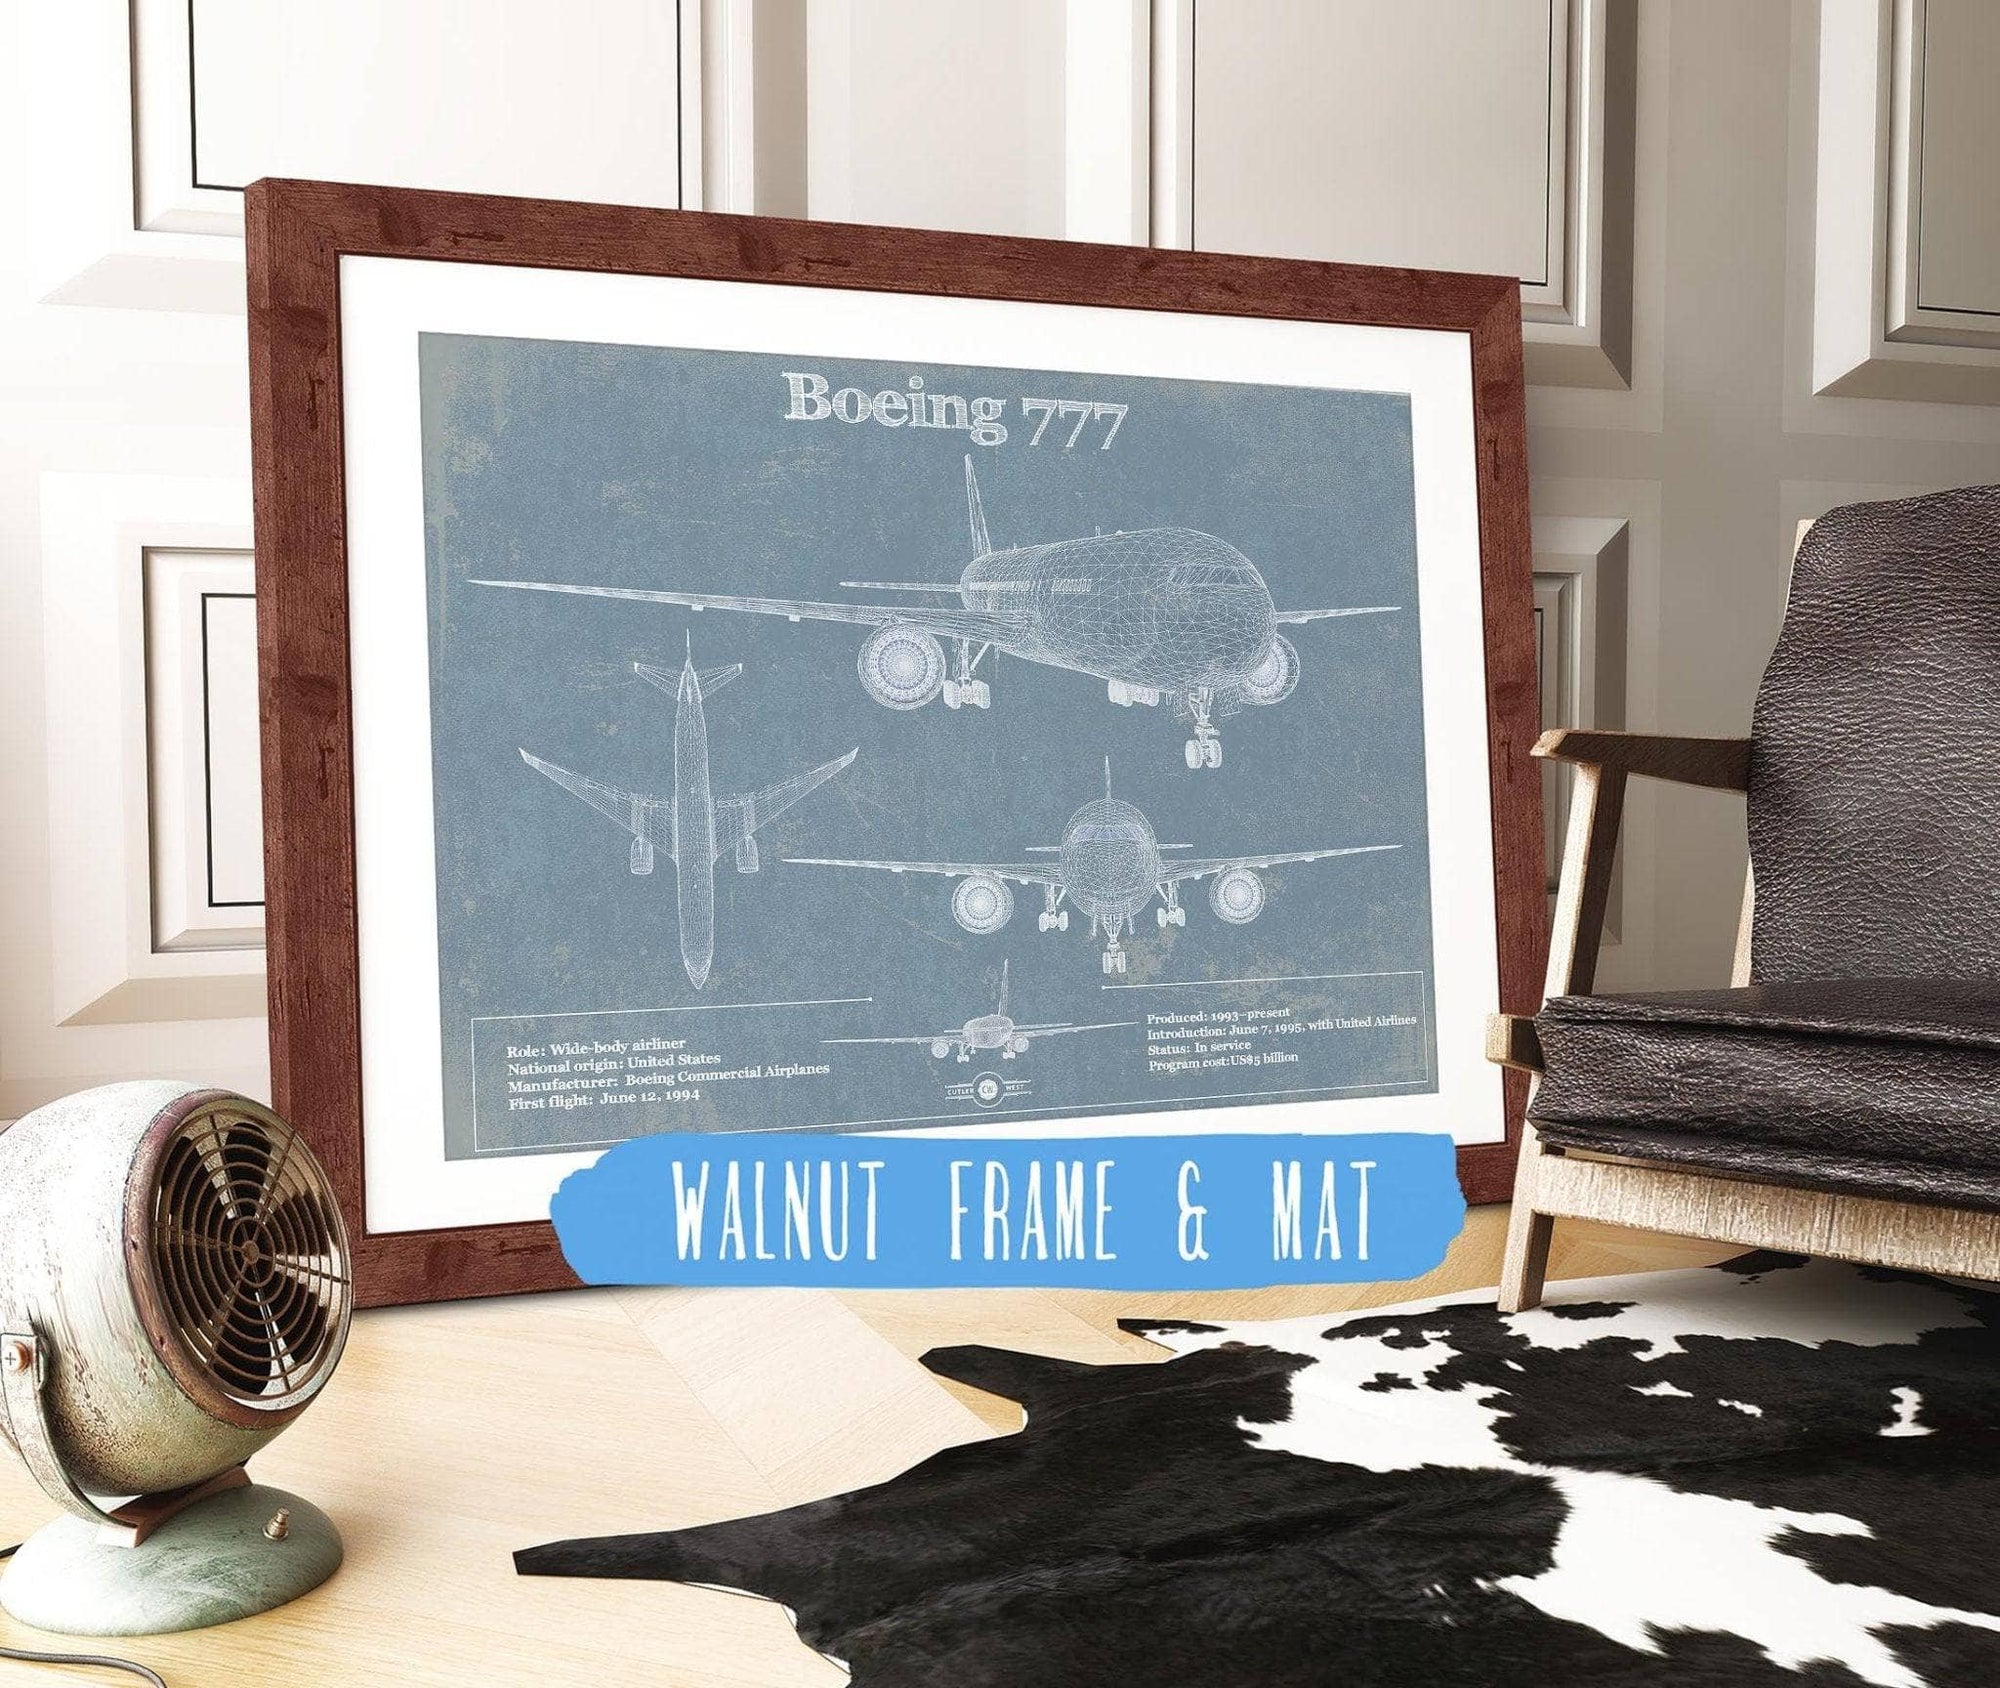 Cutler West Boeing Collection 14" x 11" / Walnut Frame & Mat Boeing 777 Vintage Aviation Blueprint Print - Custom Pilot Name Can Be Added 833447921-TOP